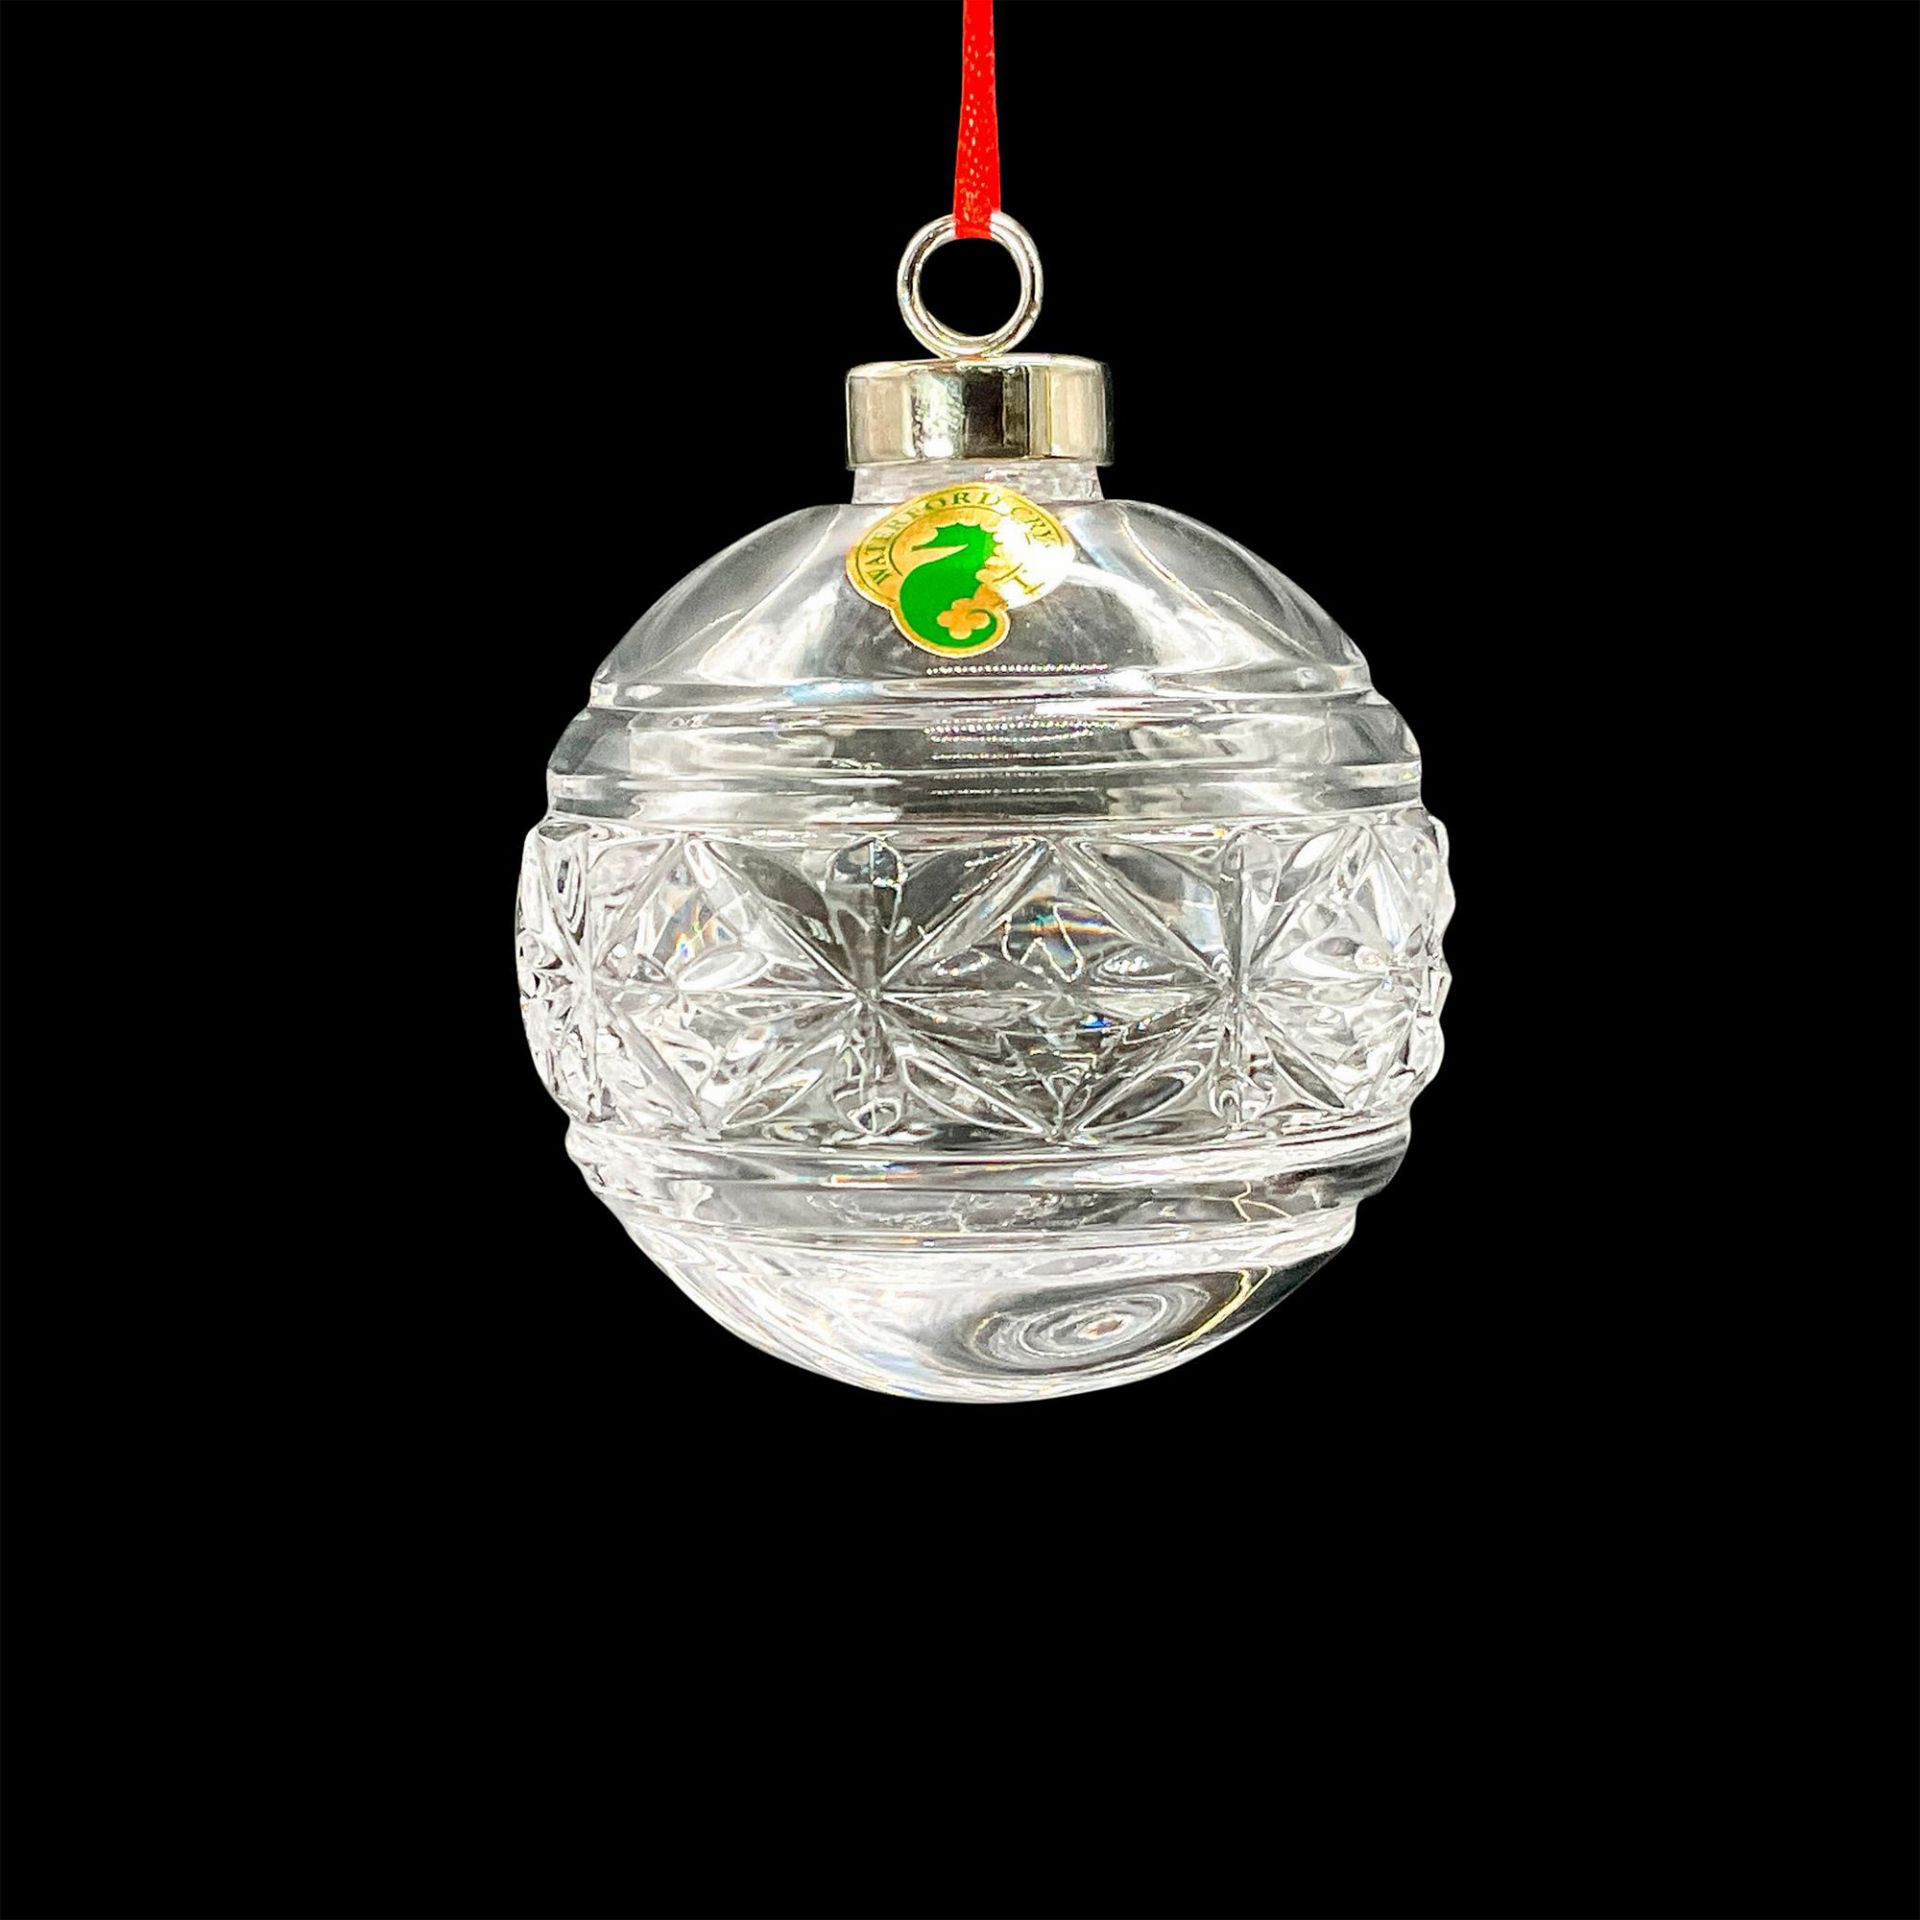 Waterford Crystal Ornament, XMAS Star Bauble